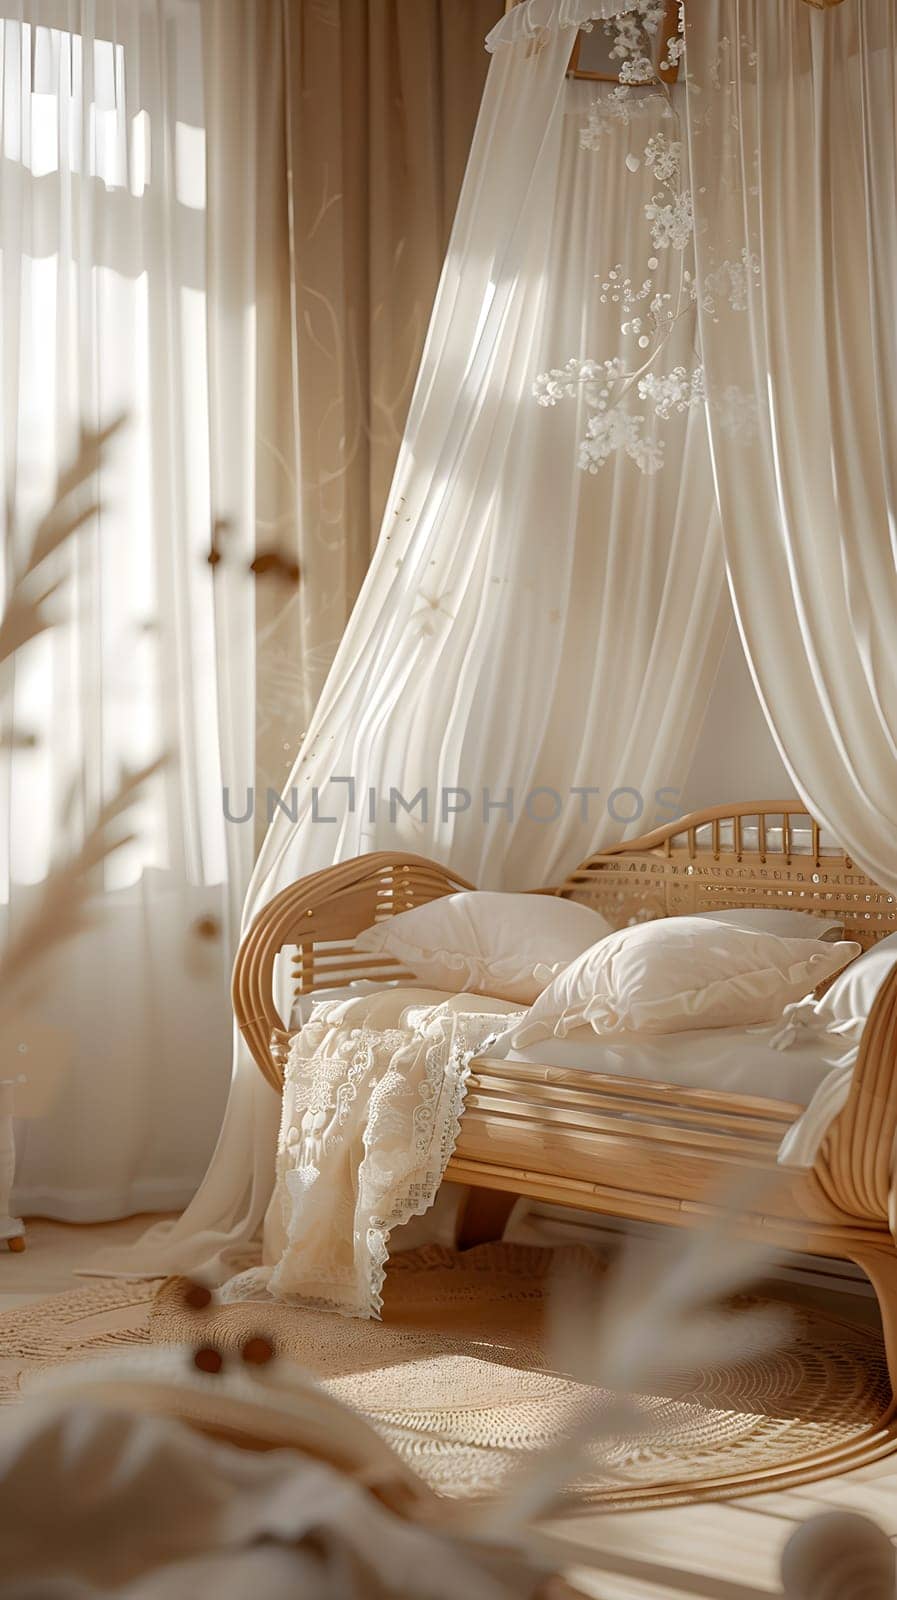 a bedroom with a wicker bed and a canopy over it by Nadtochiy